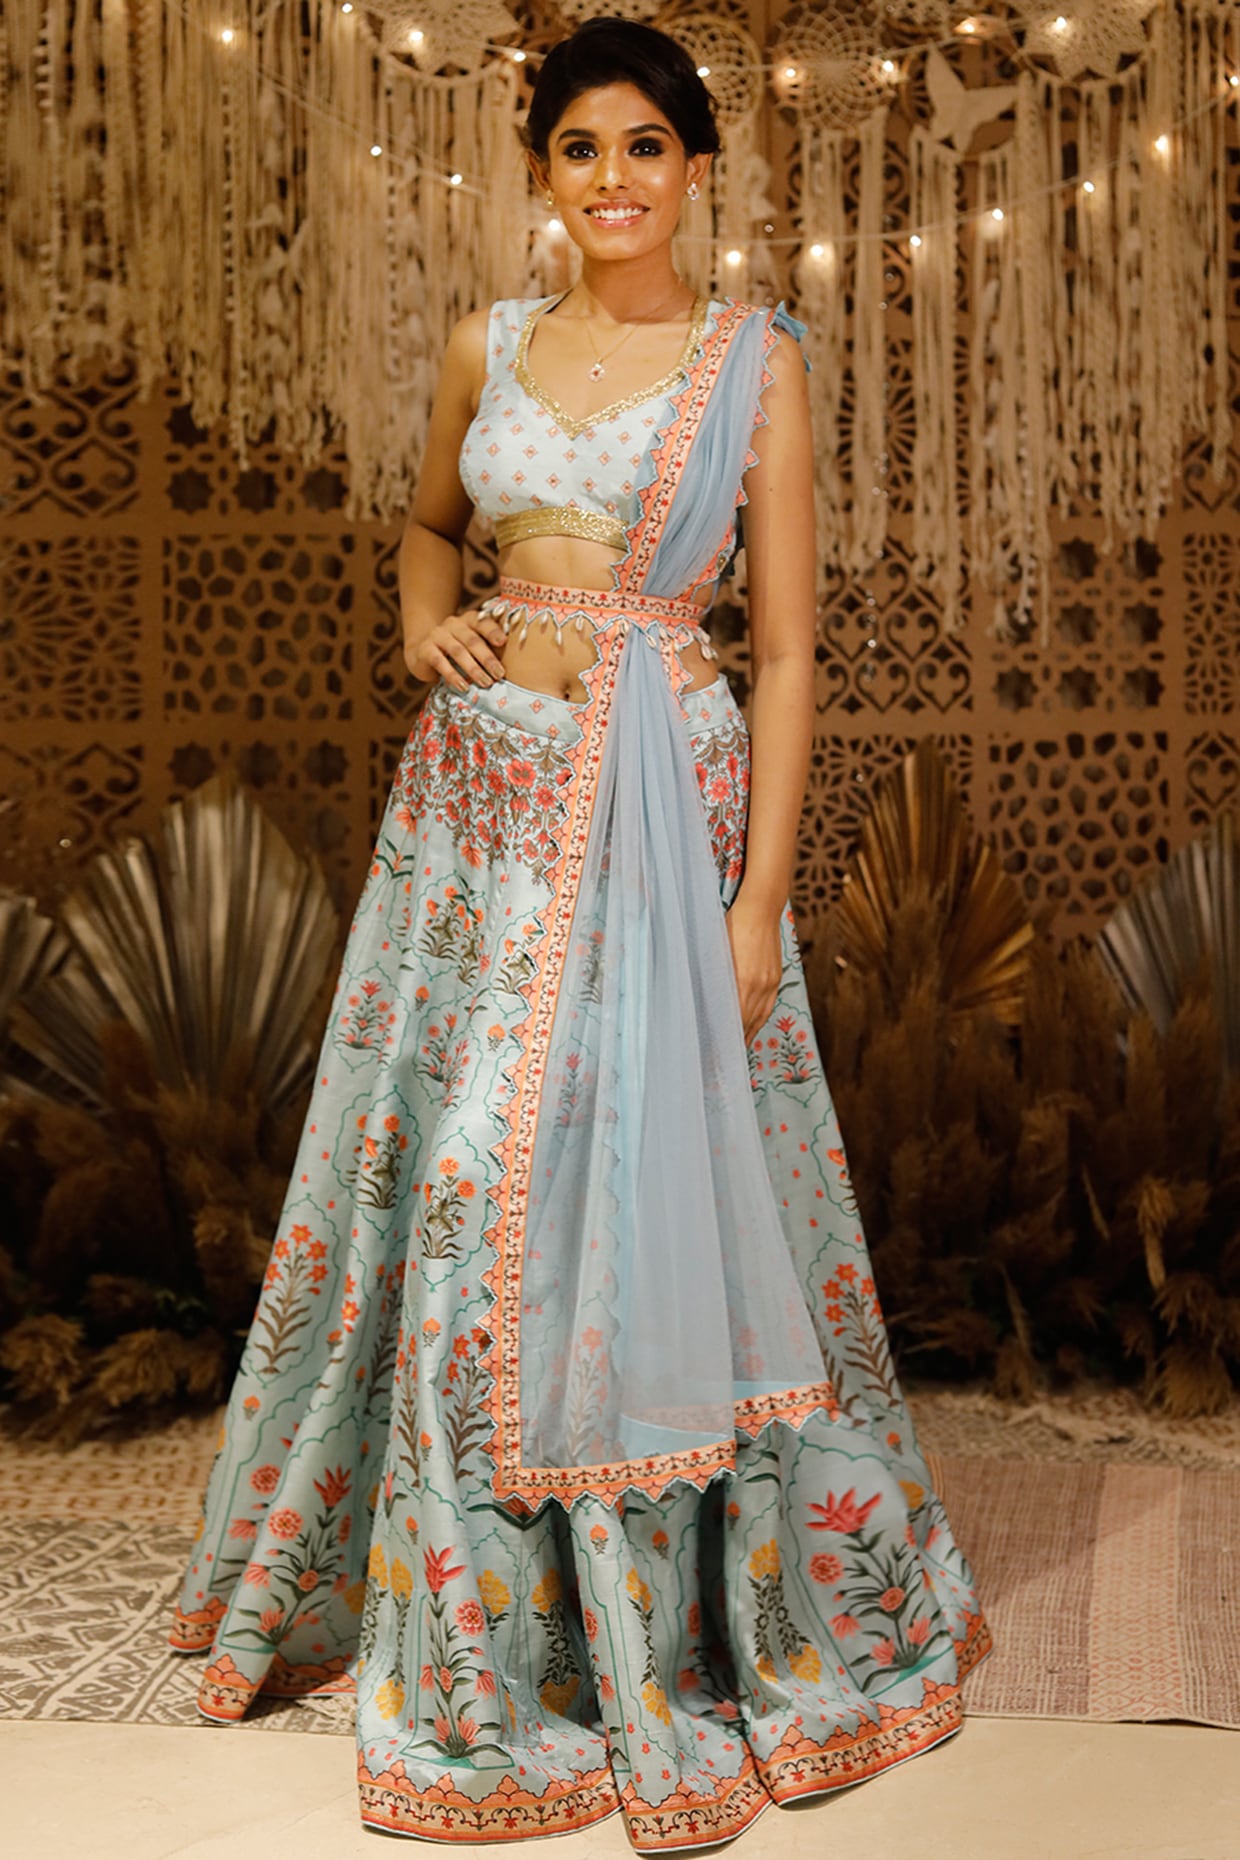 Dusty Blue Lehenga Set with Floral Embroidery - Seasons India